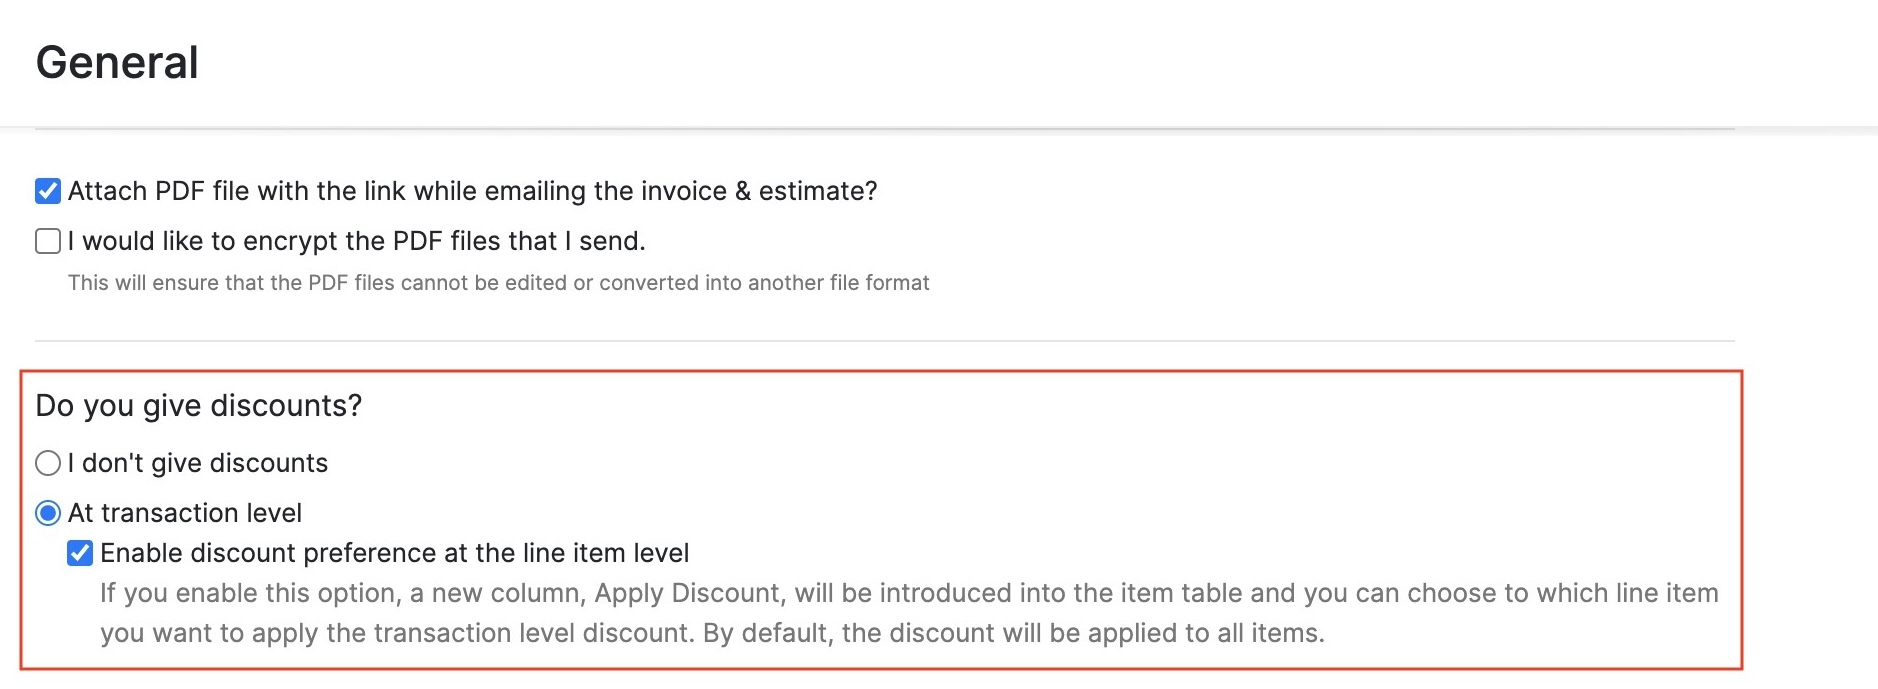 Configure Discount Preference